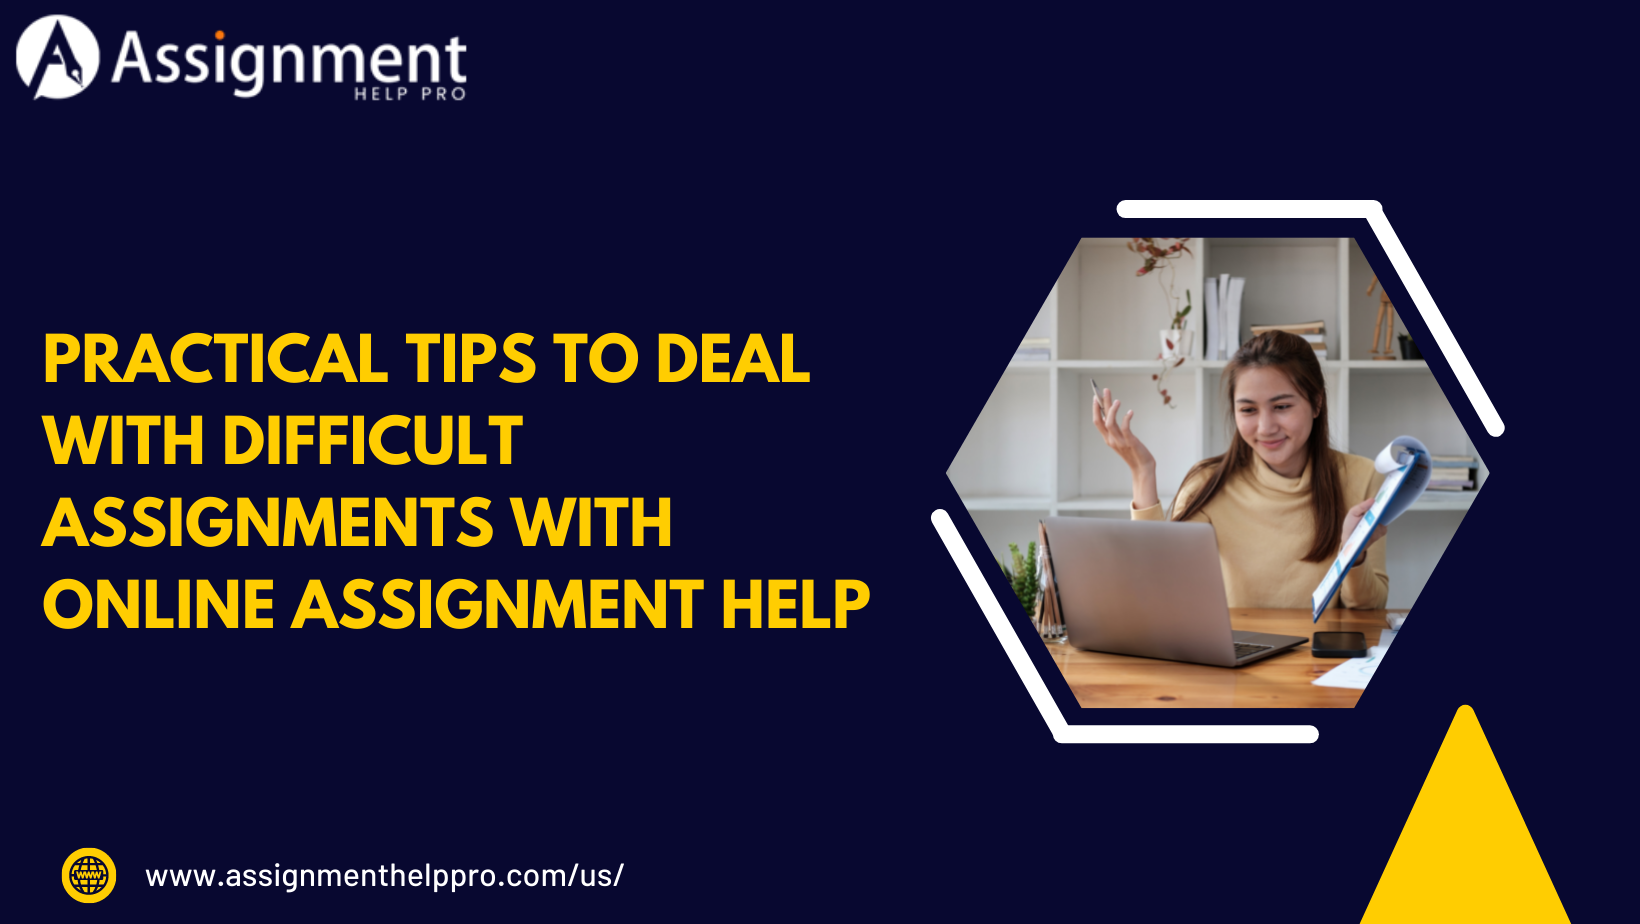 Tips to Deal With Difficult Assignments with Assignment Help